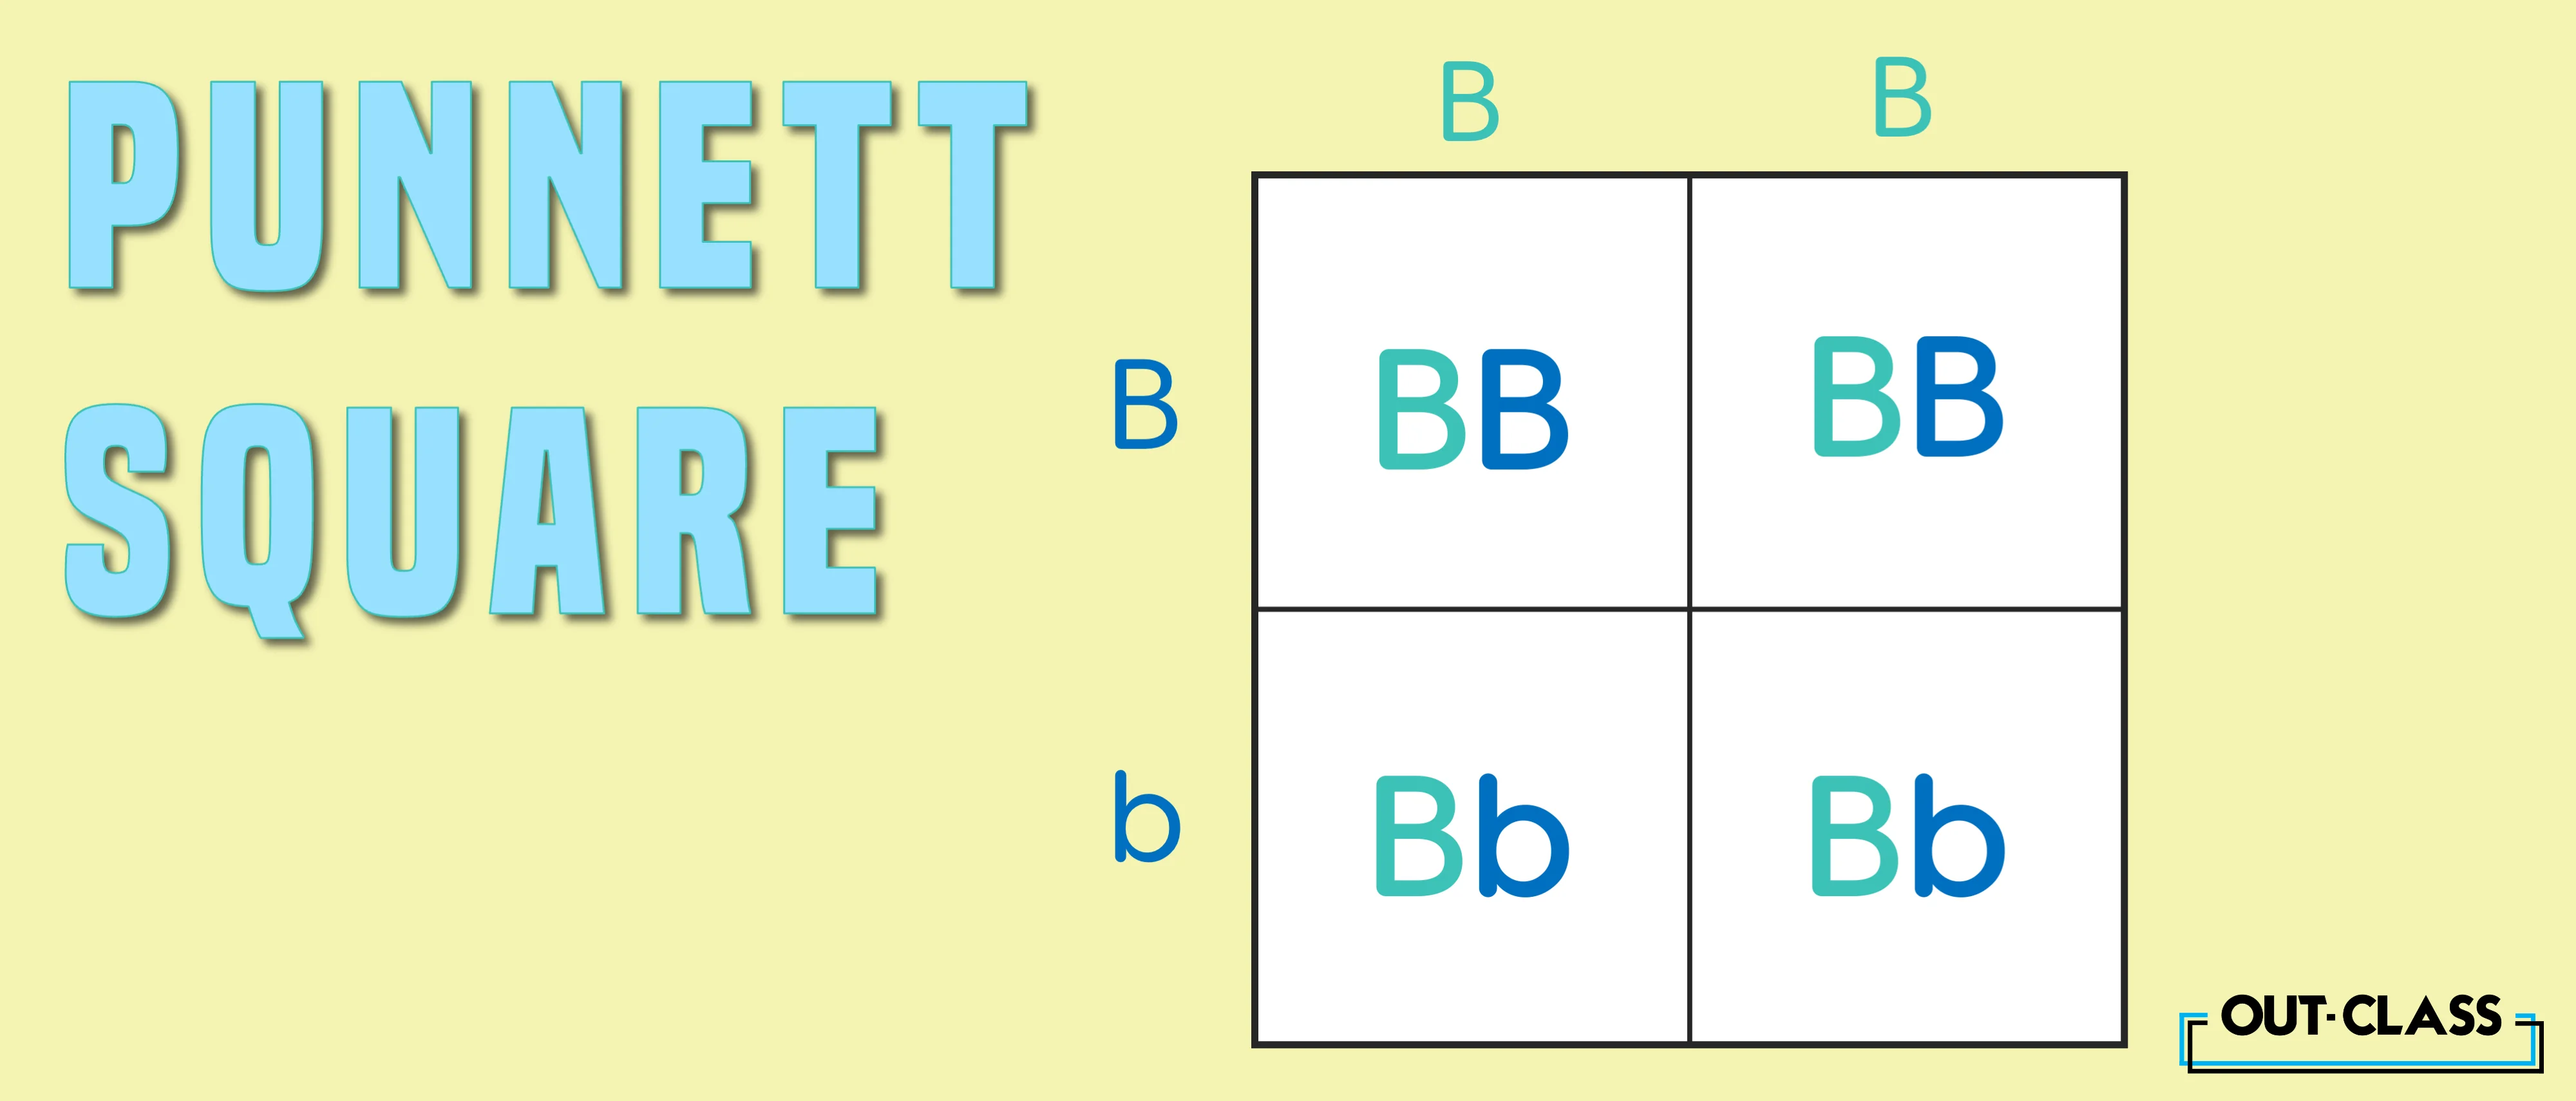 The blood type punnett square examples include the parental gametes which play a role in the inheritance, a key topic in O Level Biology..